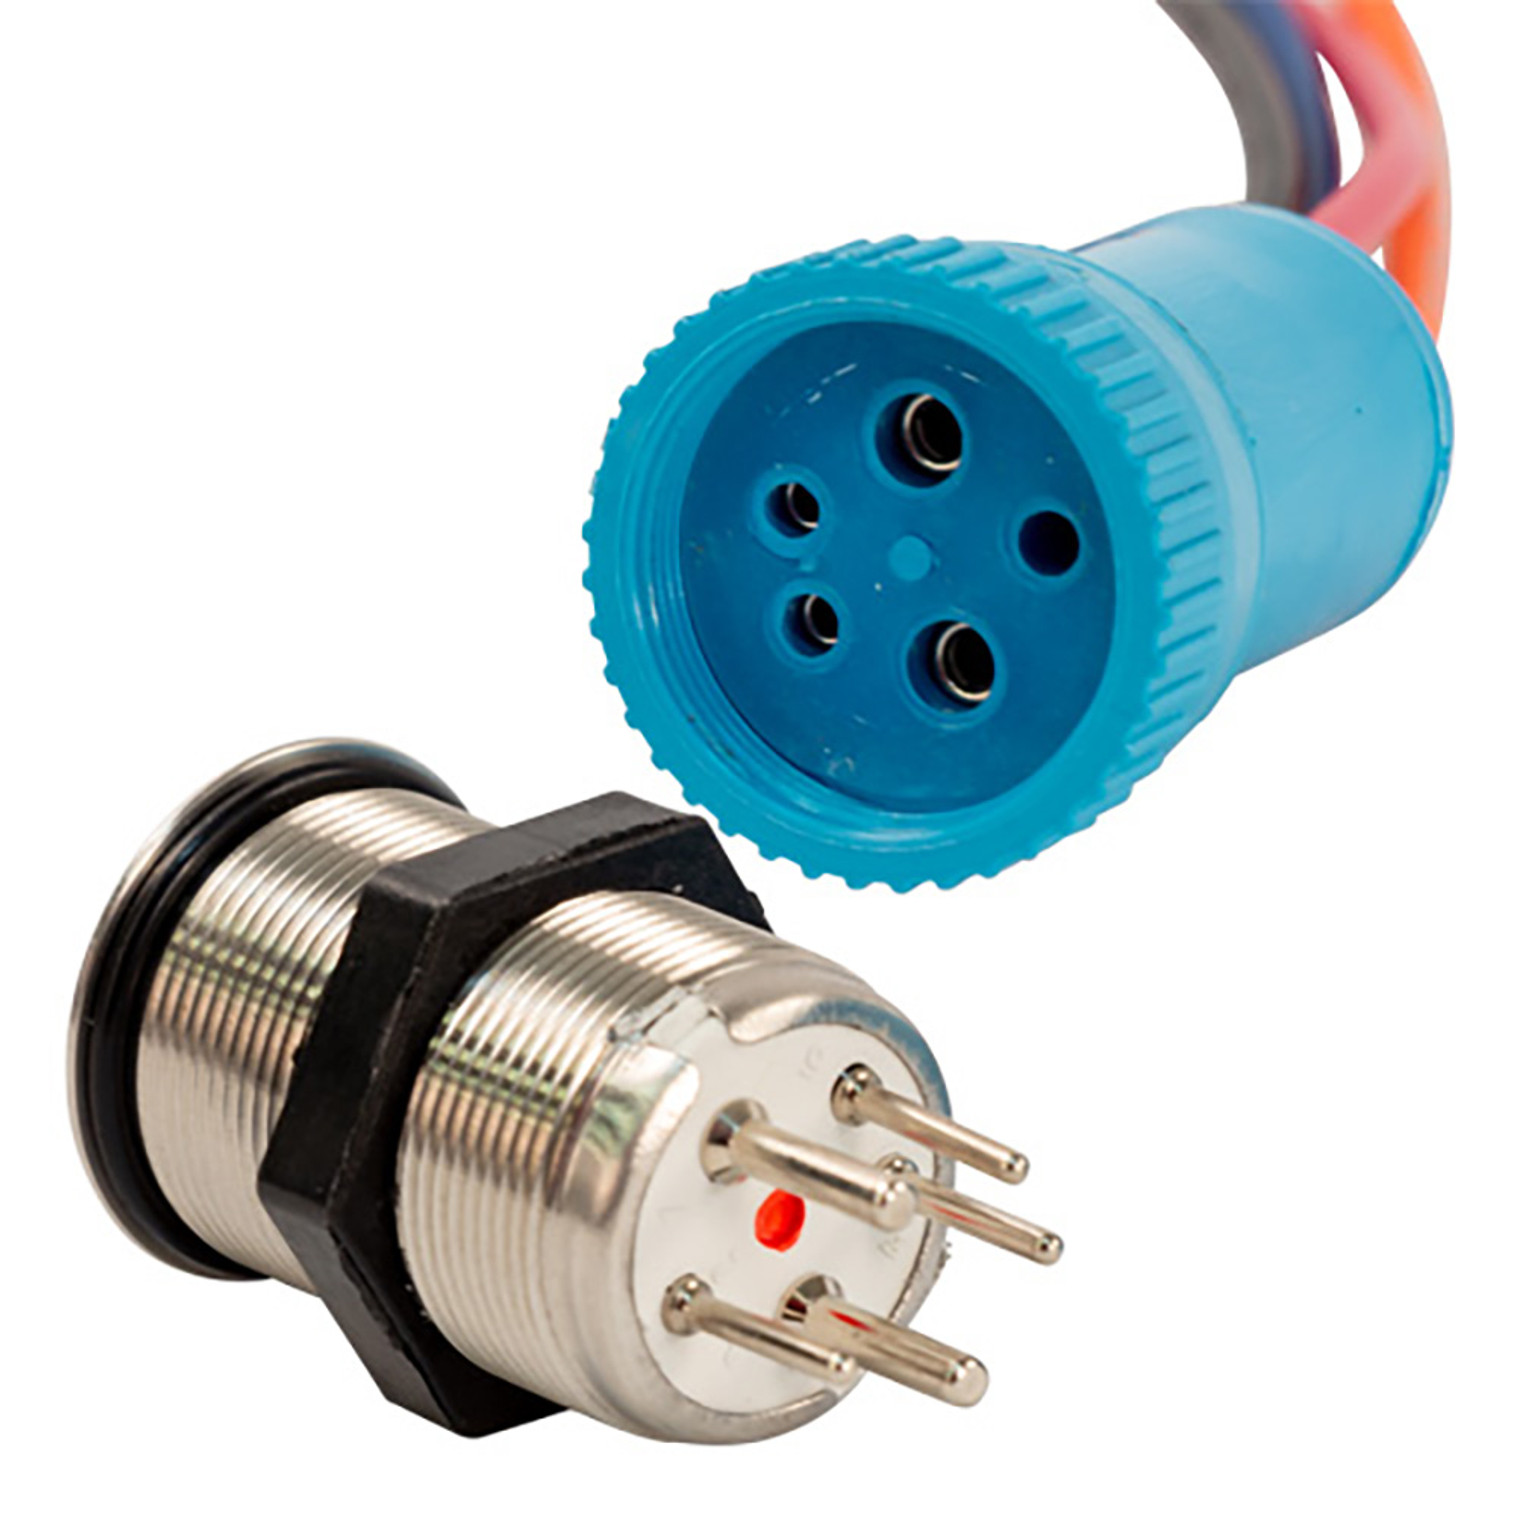 Bluewater 22mm In Rush Push Button Switch - Off/(On)/(On) Double Momentary Contact - Blue/Green/Red LED